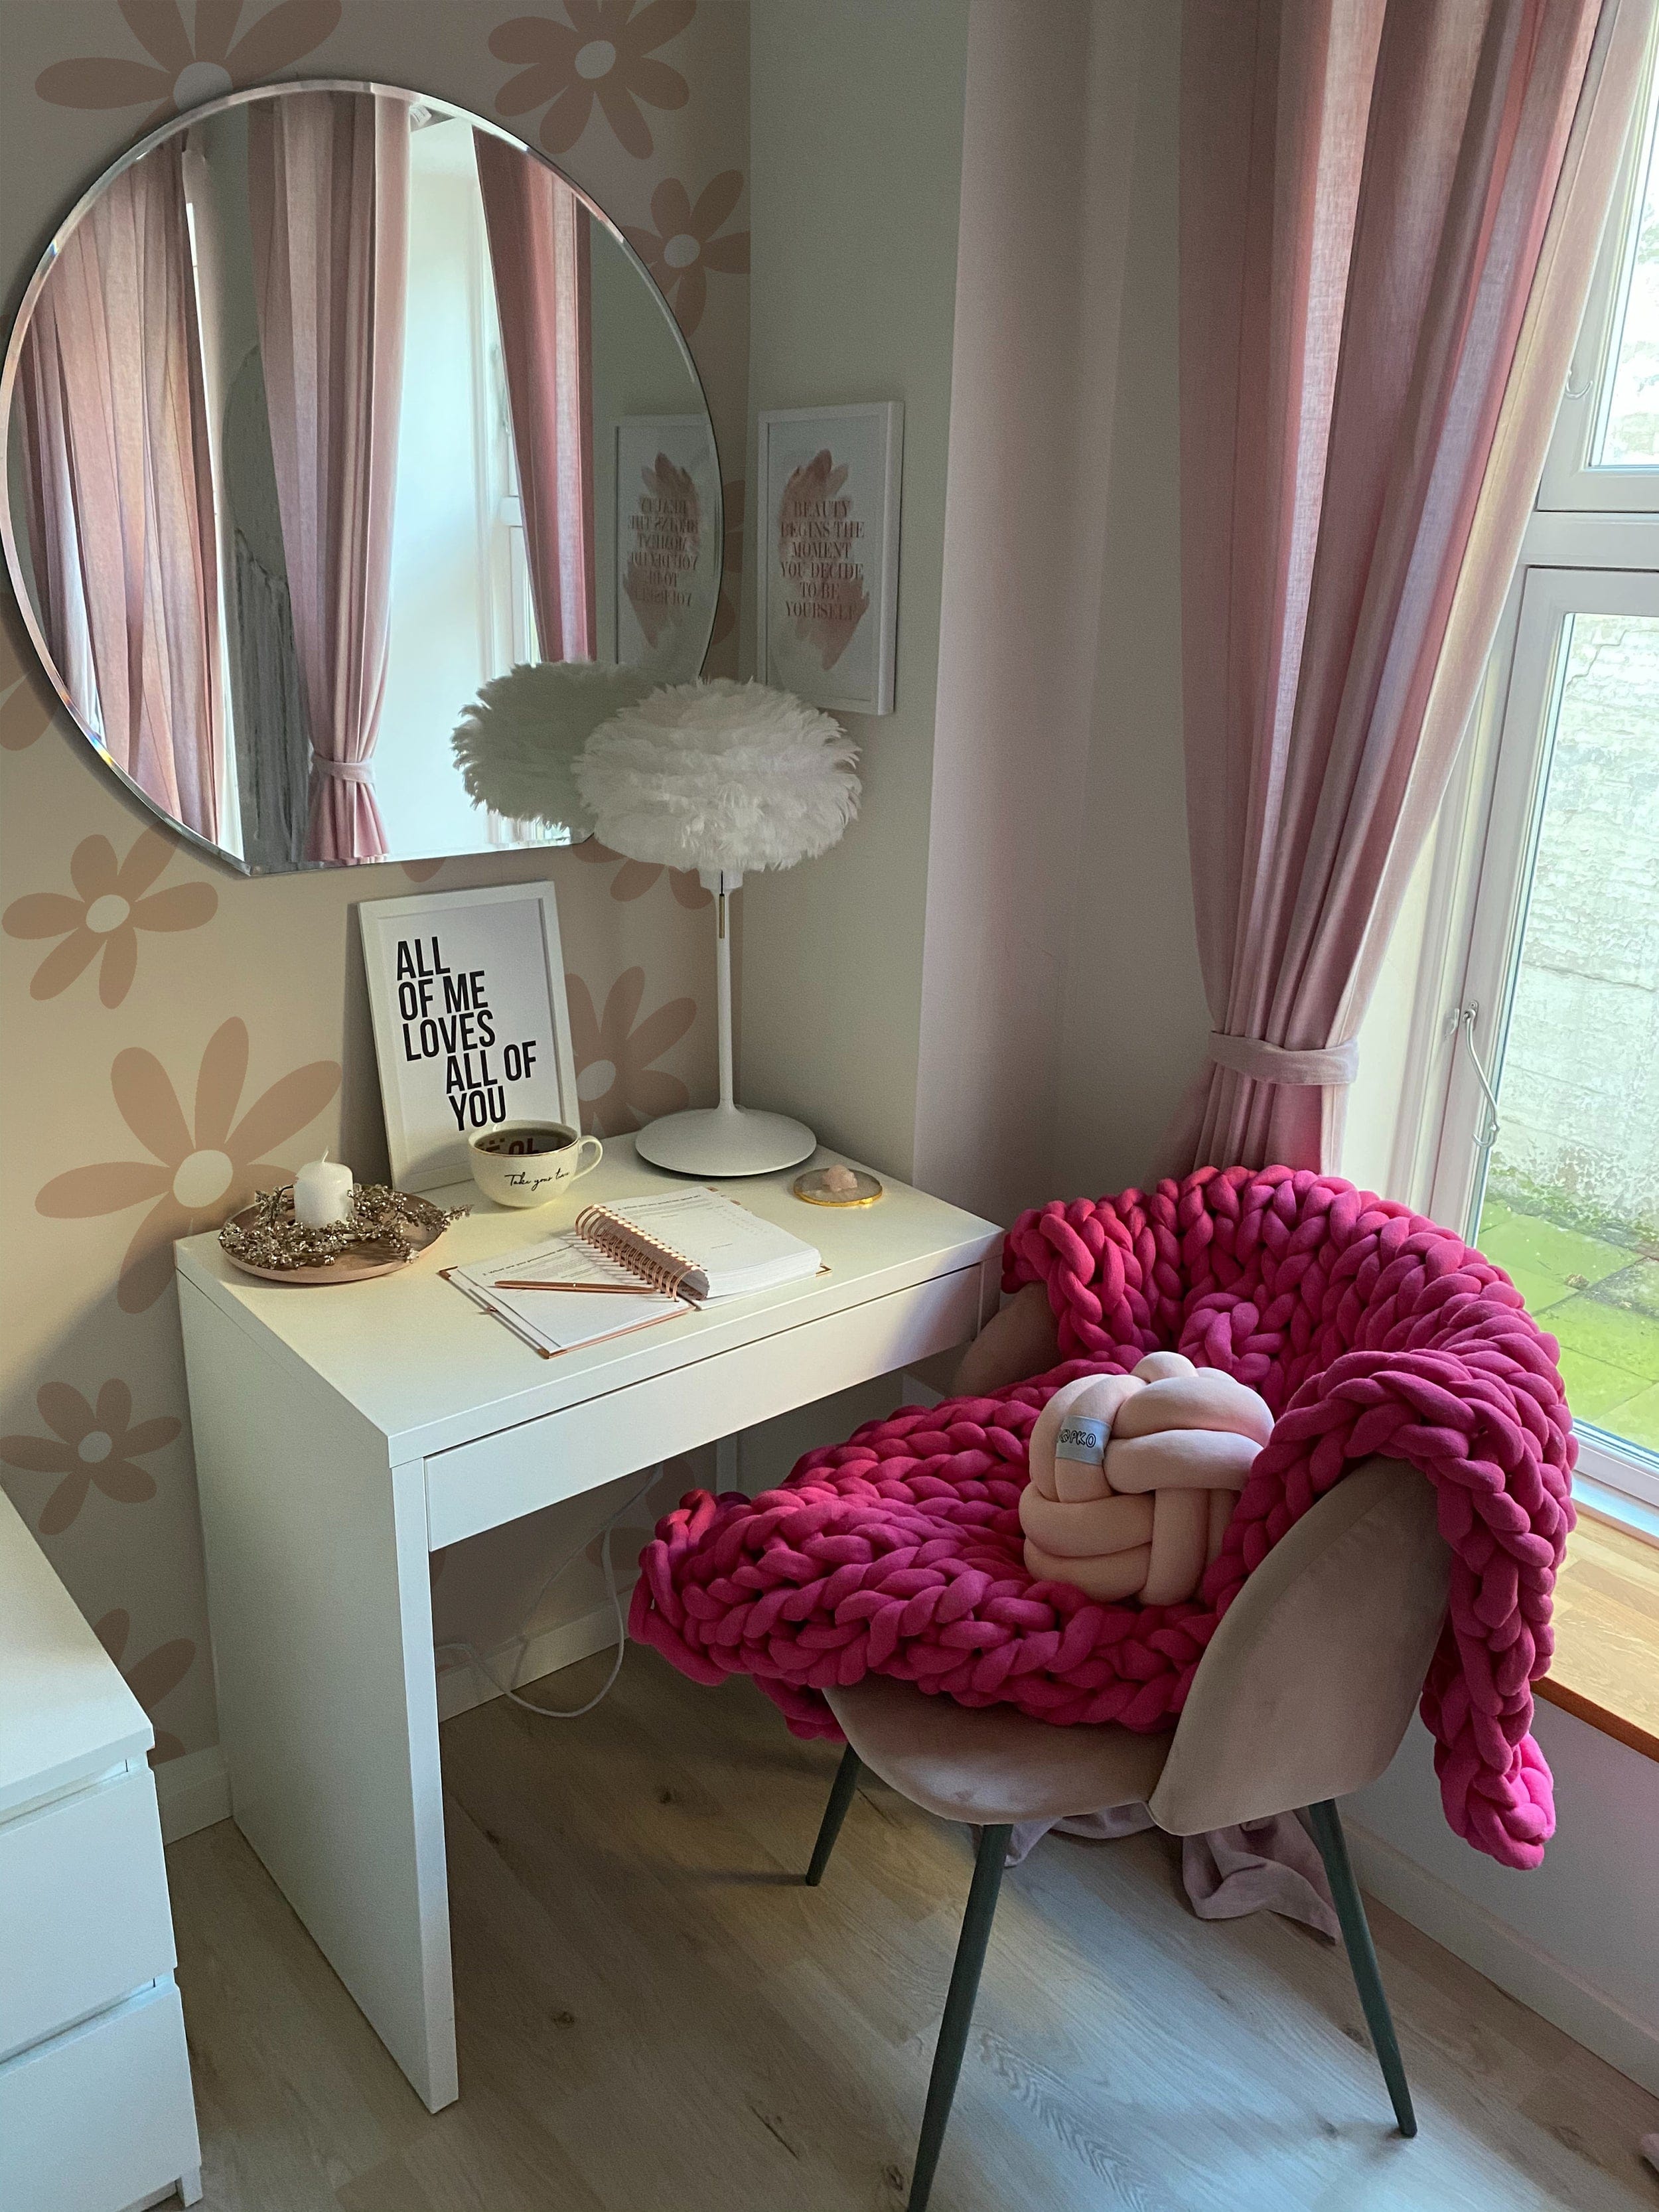 A cozy nook with a white desk and a chair draped with a chunky pink blanket. The wall is adorned with Simple Mauve Floral Wallpaper, complementing the pink curtains and creating a warm, feminine atmosphere. A round mirror and inspirational quotes complete the look.